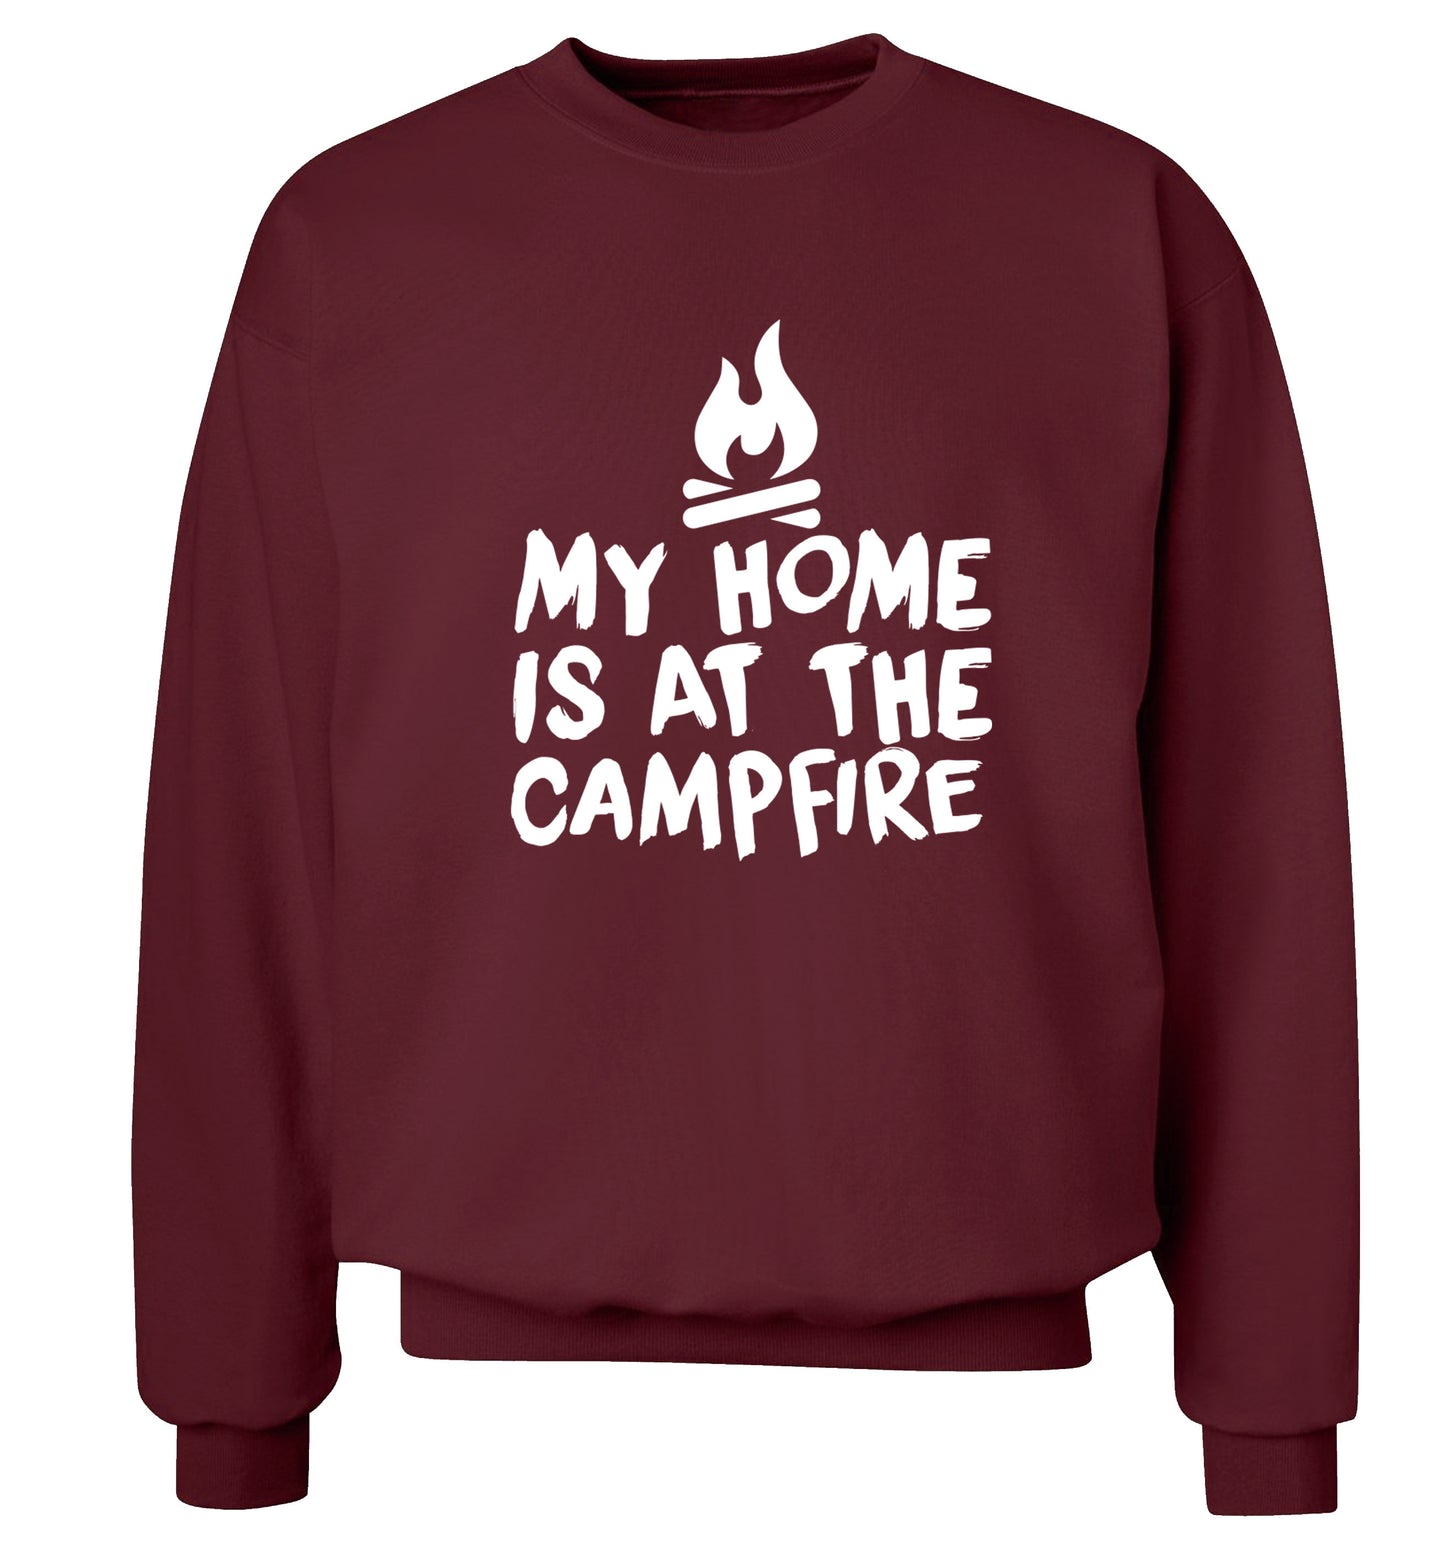 My home is at the campfire Adult's unisex maroon Sweater 2XL